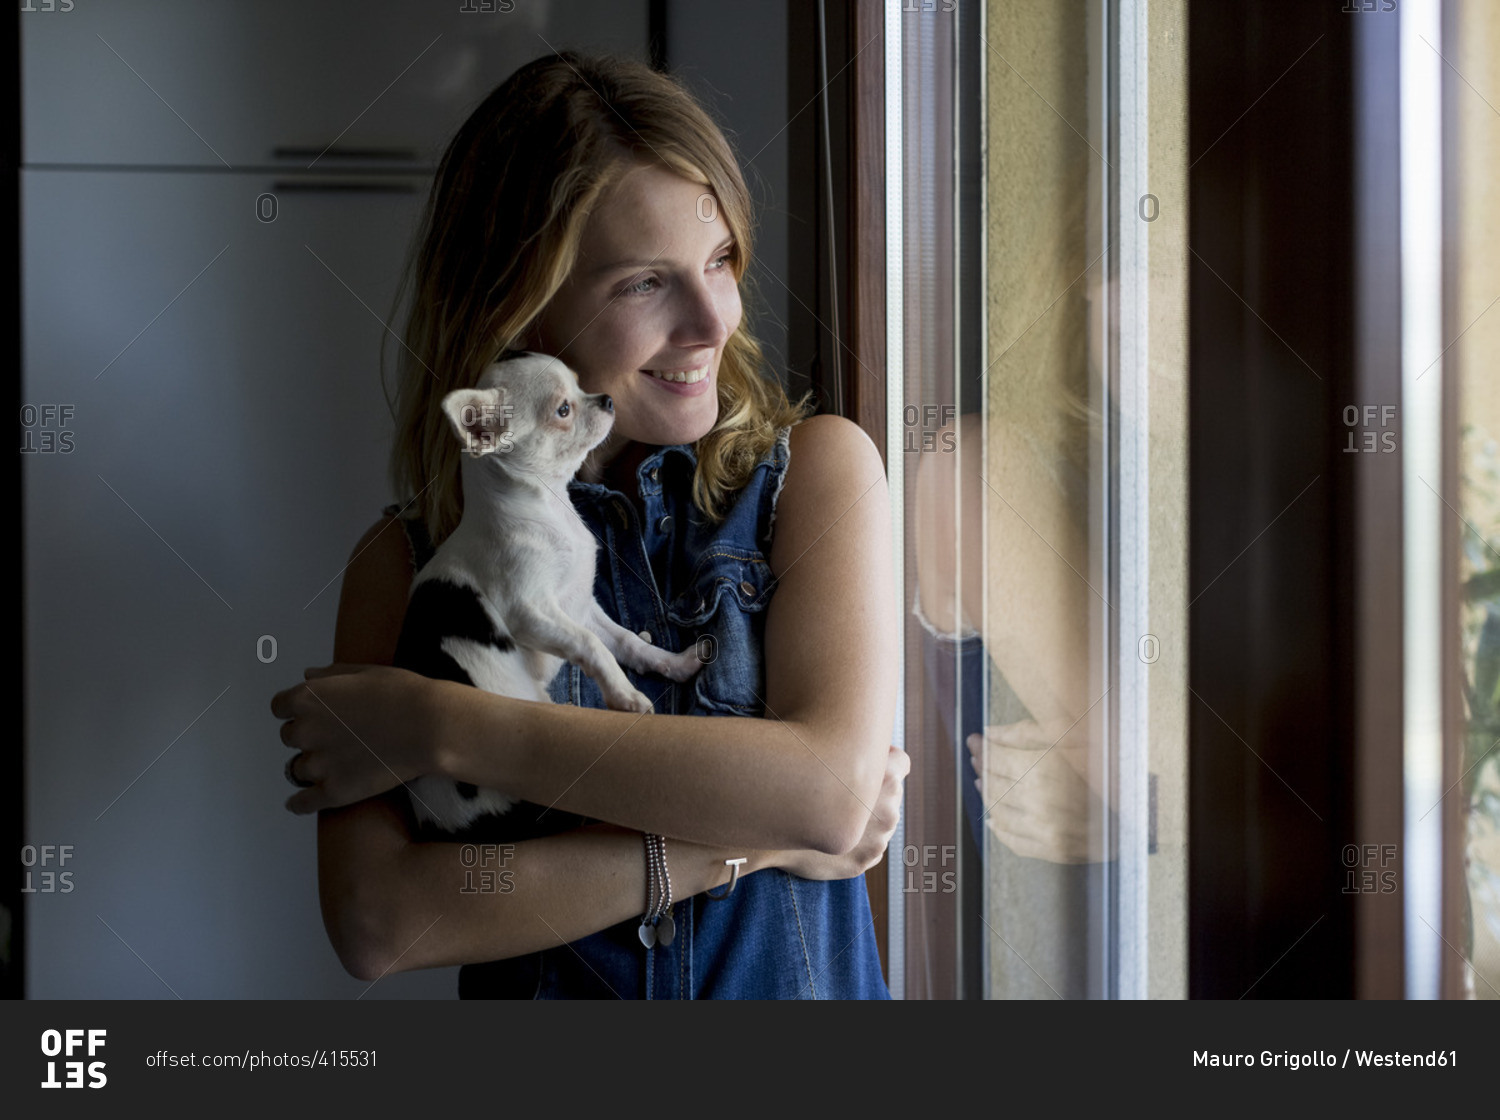 Smiling woman with dog on her arms looking through window